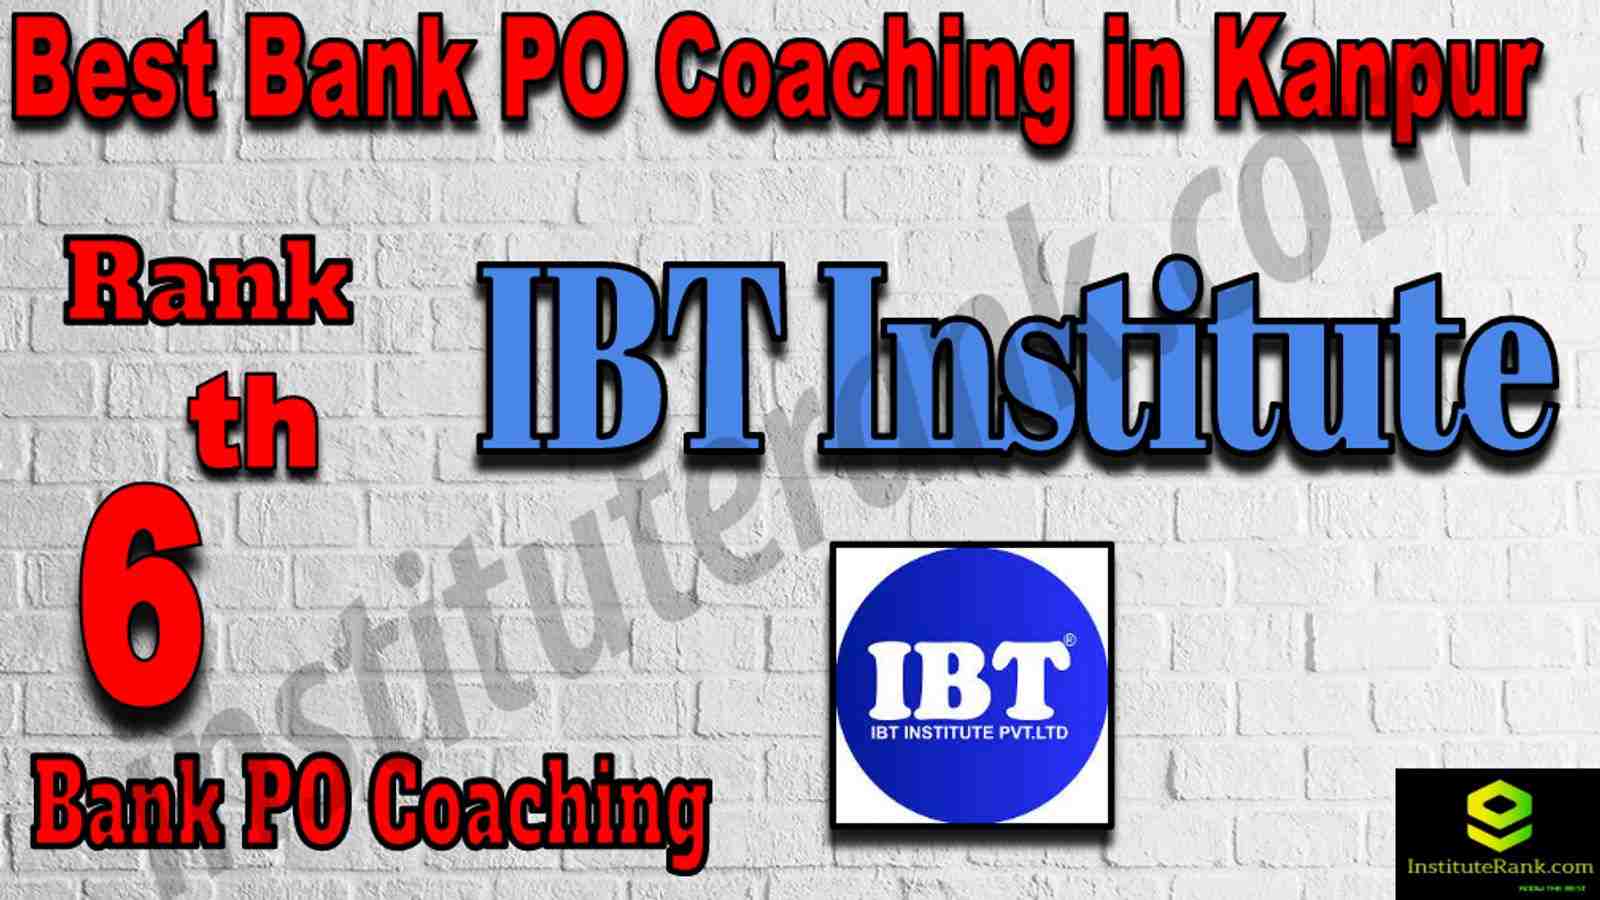 6th Best Bank PO Coaching in Kanpur